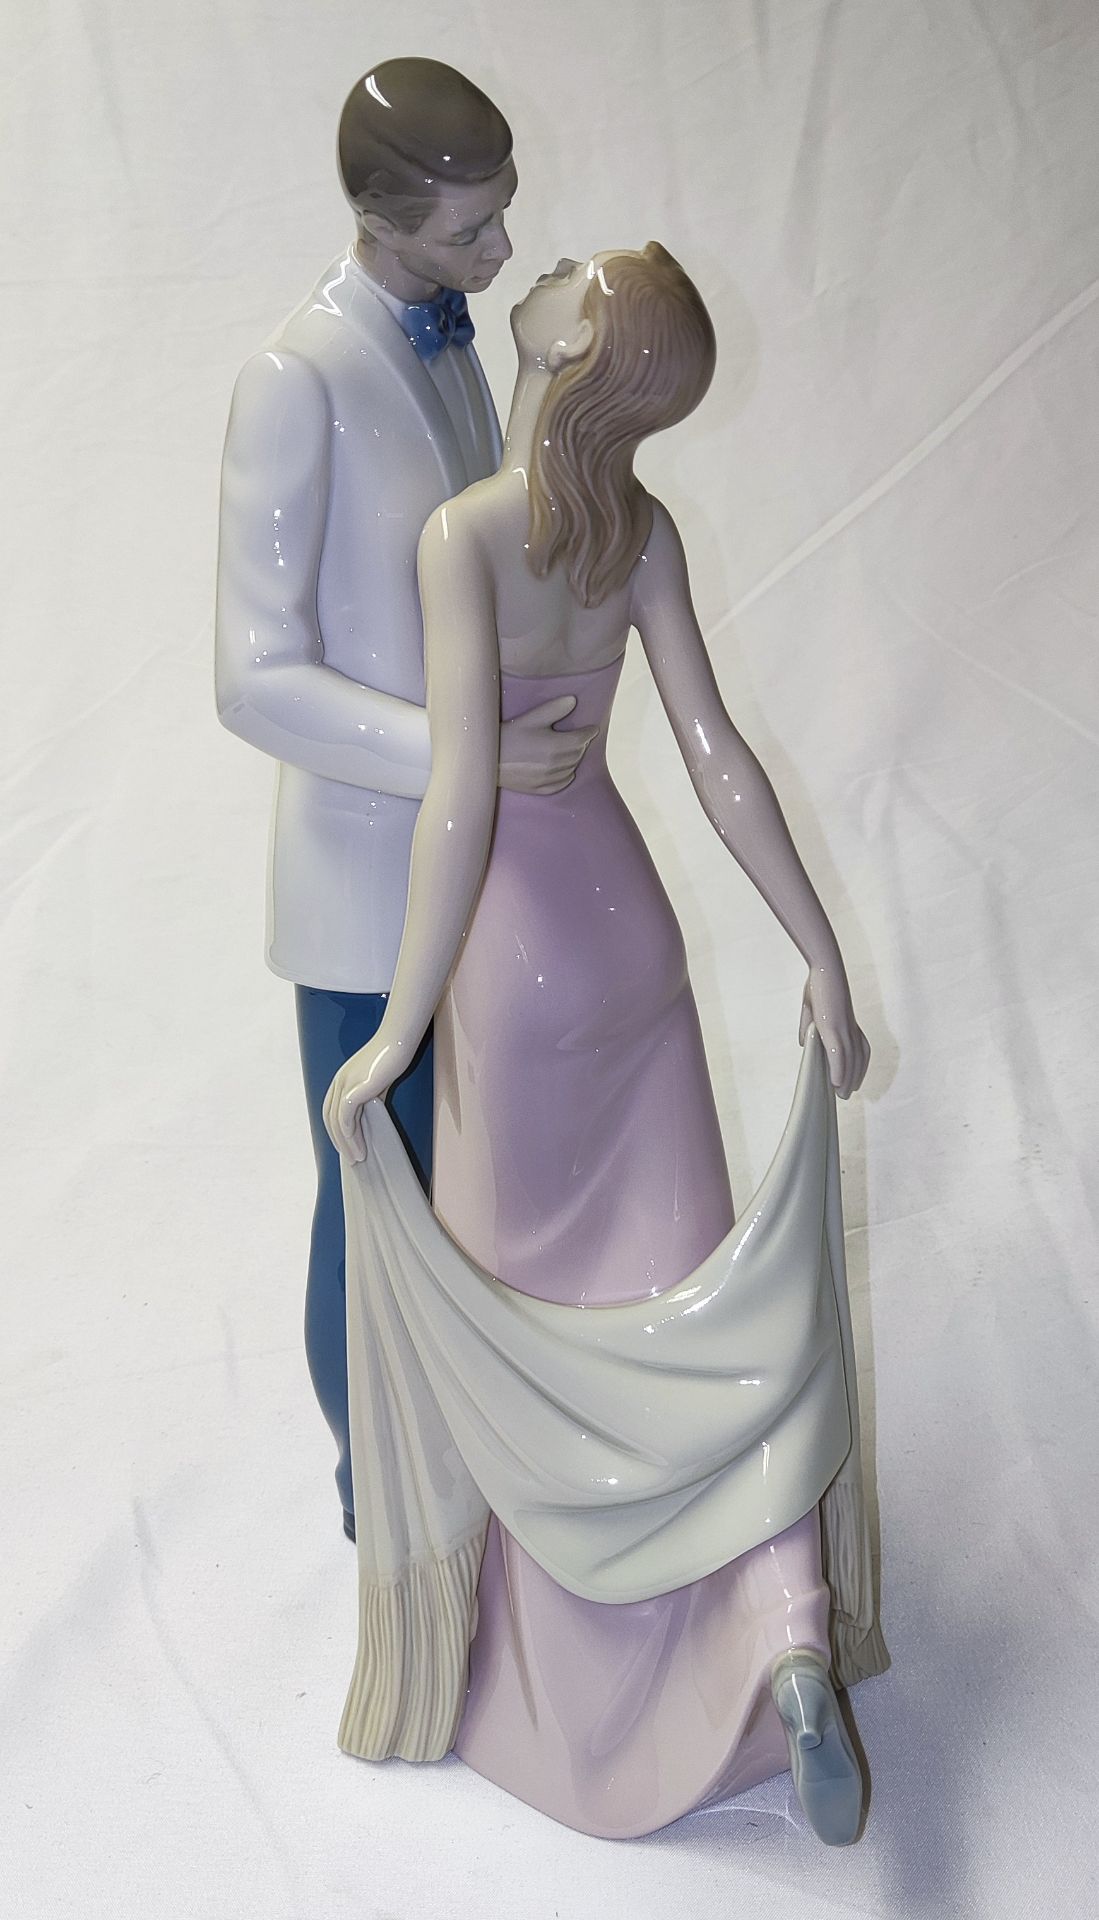 1 x LLADRO Happy Anniversary Porcelain Statue - New/Boxed - RRP £520.00 - Ref: /HOC232/HC5 - CL987 - - Image 4 of 25